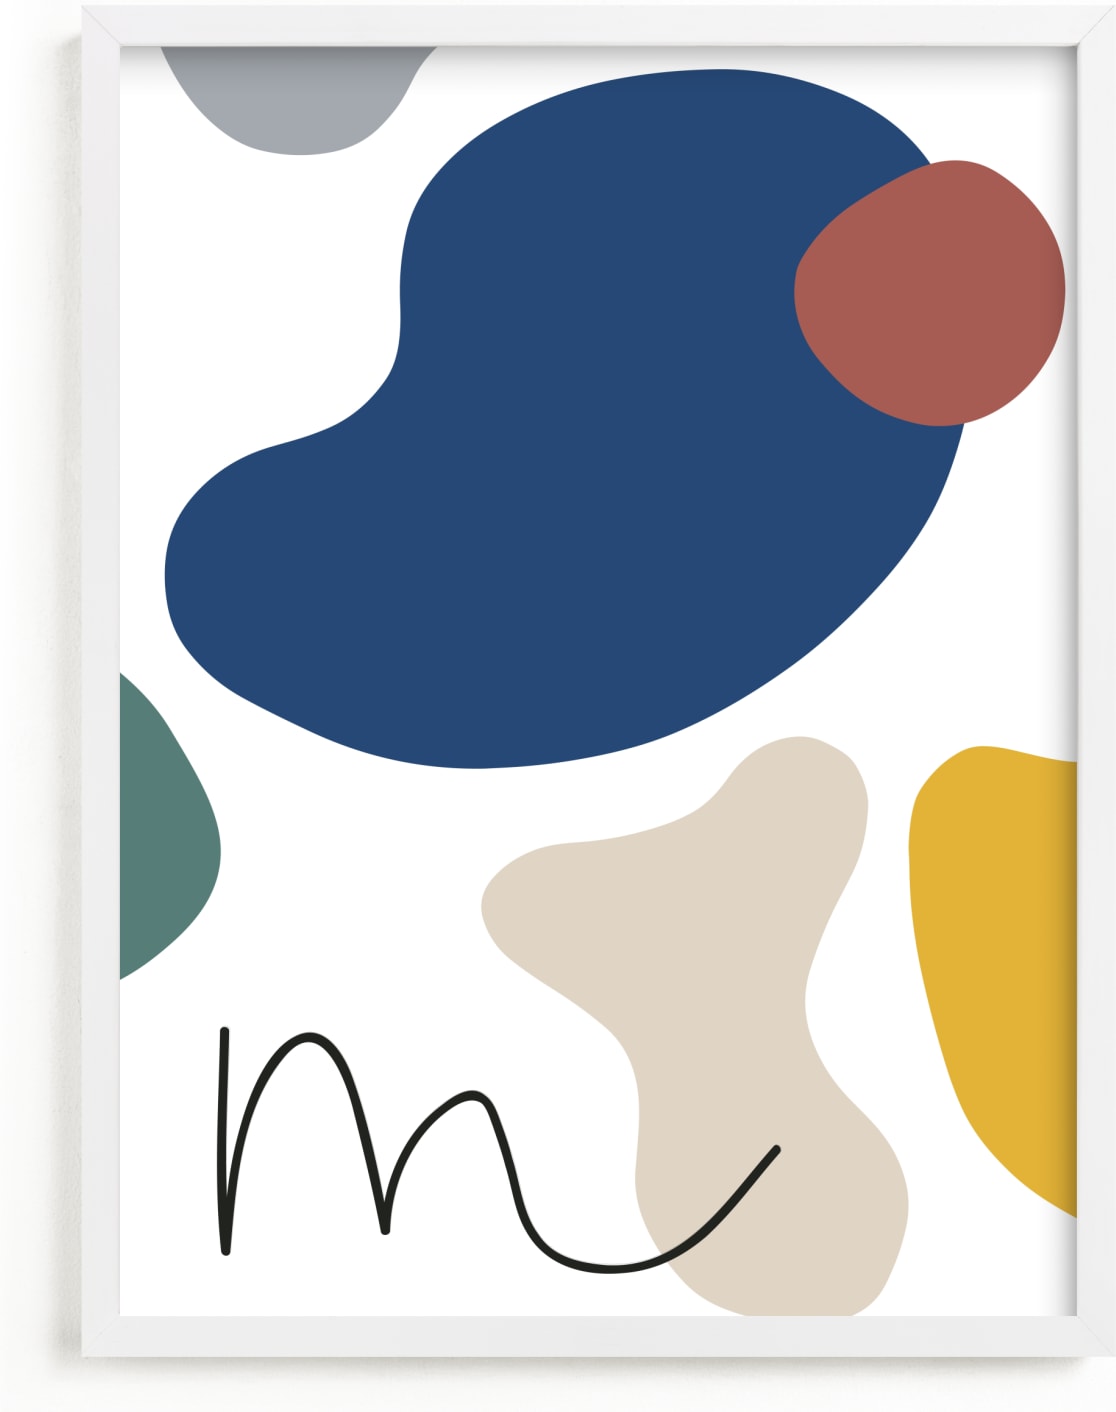 This is a blue personalized art for kid by Sumak Studio called Abstract Shapes I.